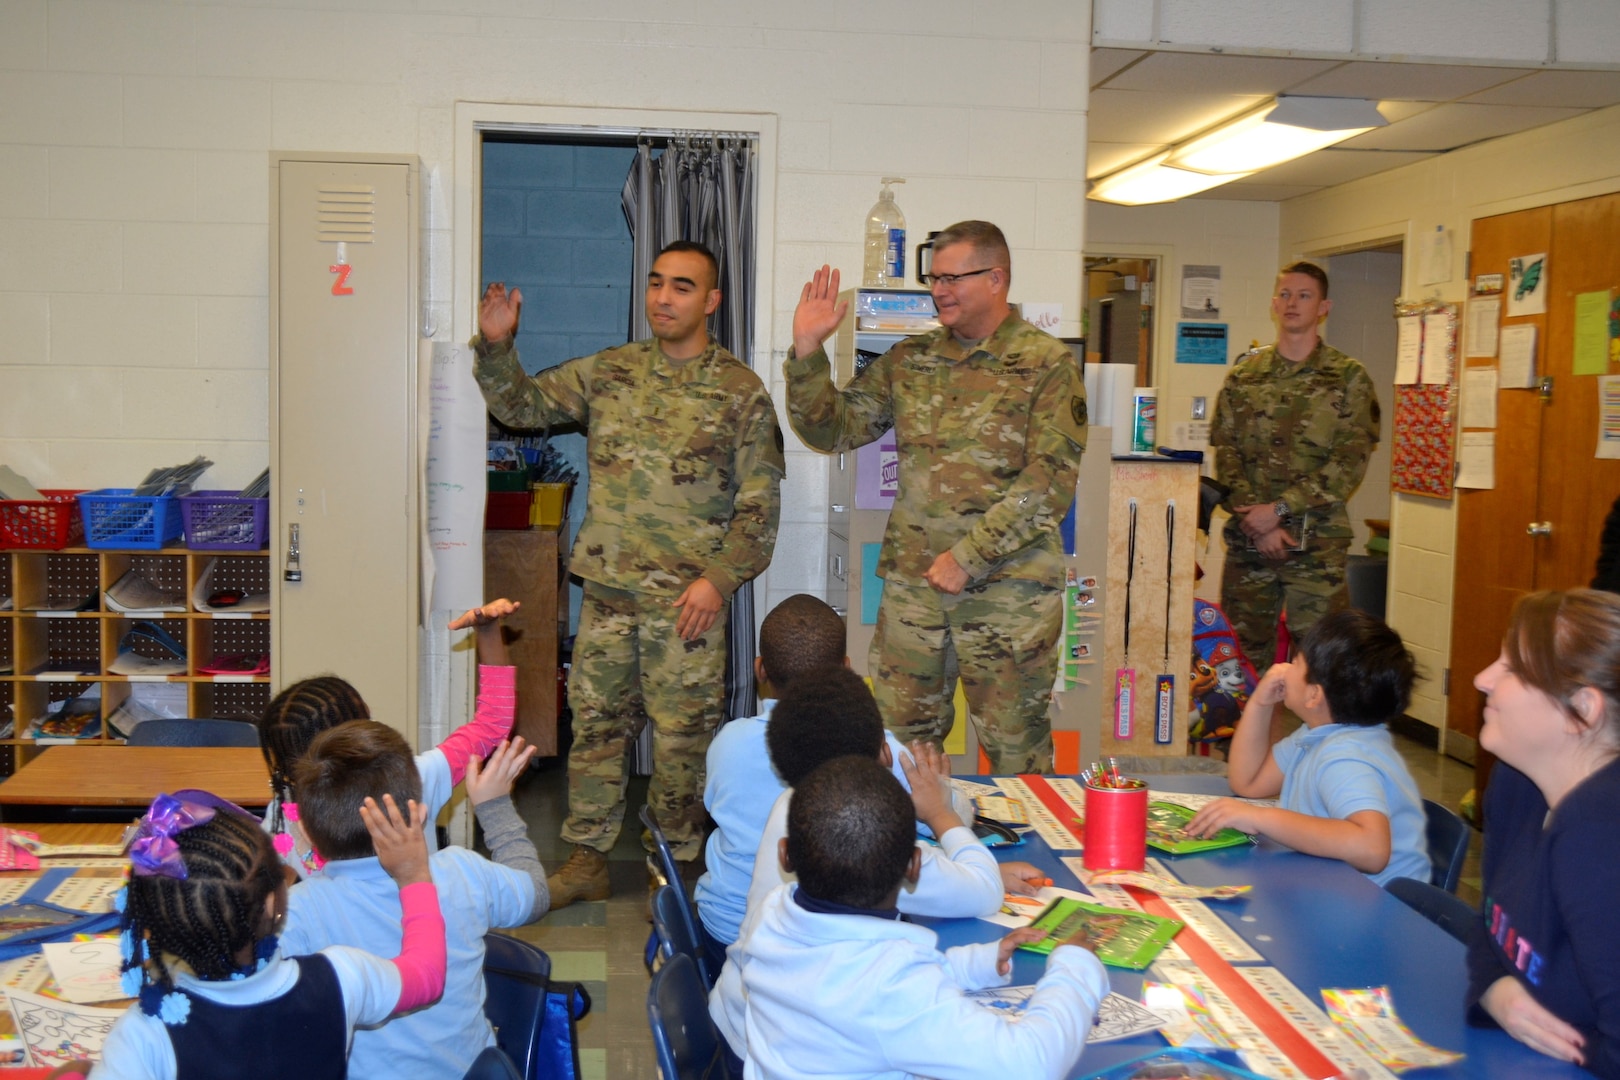 Army Chief Warrant Officer 3 Eugene Garcia, left, Brig. Gen. Mark Simerly, DLA Troop Support commander, middle, and 1st. Lt. Riley Kramer, DLA Troop Support Aide-de-Camp, right, greet students during the Children’s Holiday Party at Benjamin Franklin Elementary School Dec. 6, 2018 in Philadelphia.